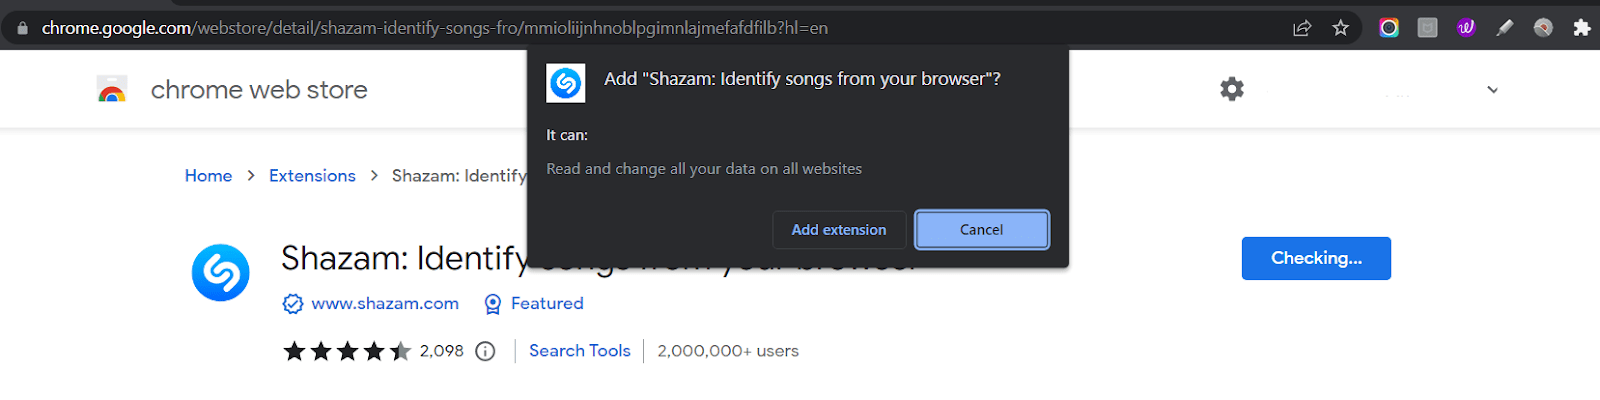 installing Shazam web browser extension to fix Shazam music recognition not working, app issues and problems, and crashing